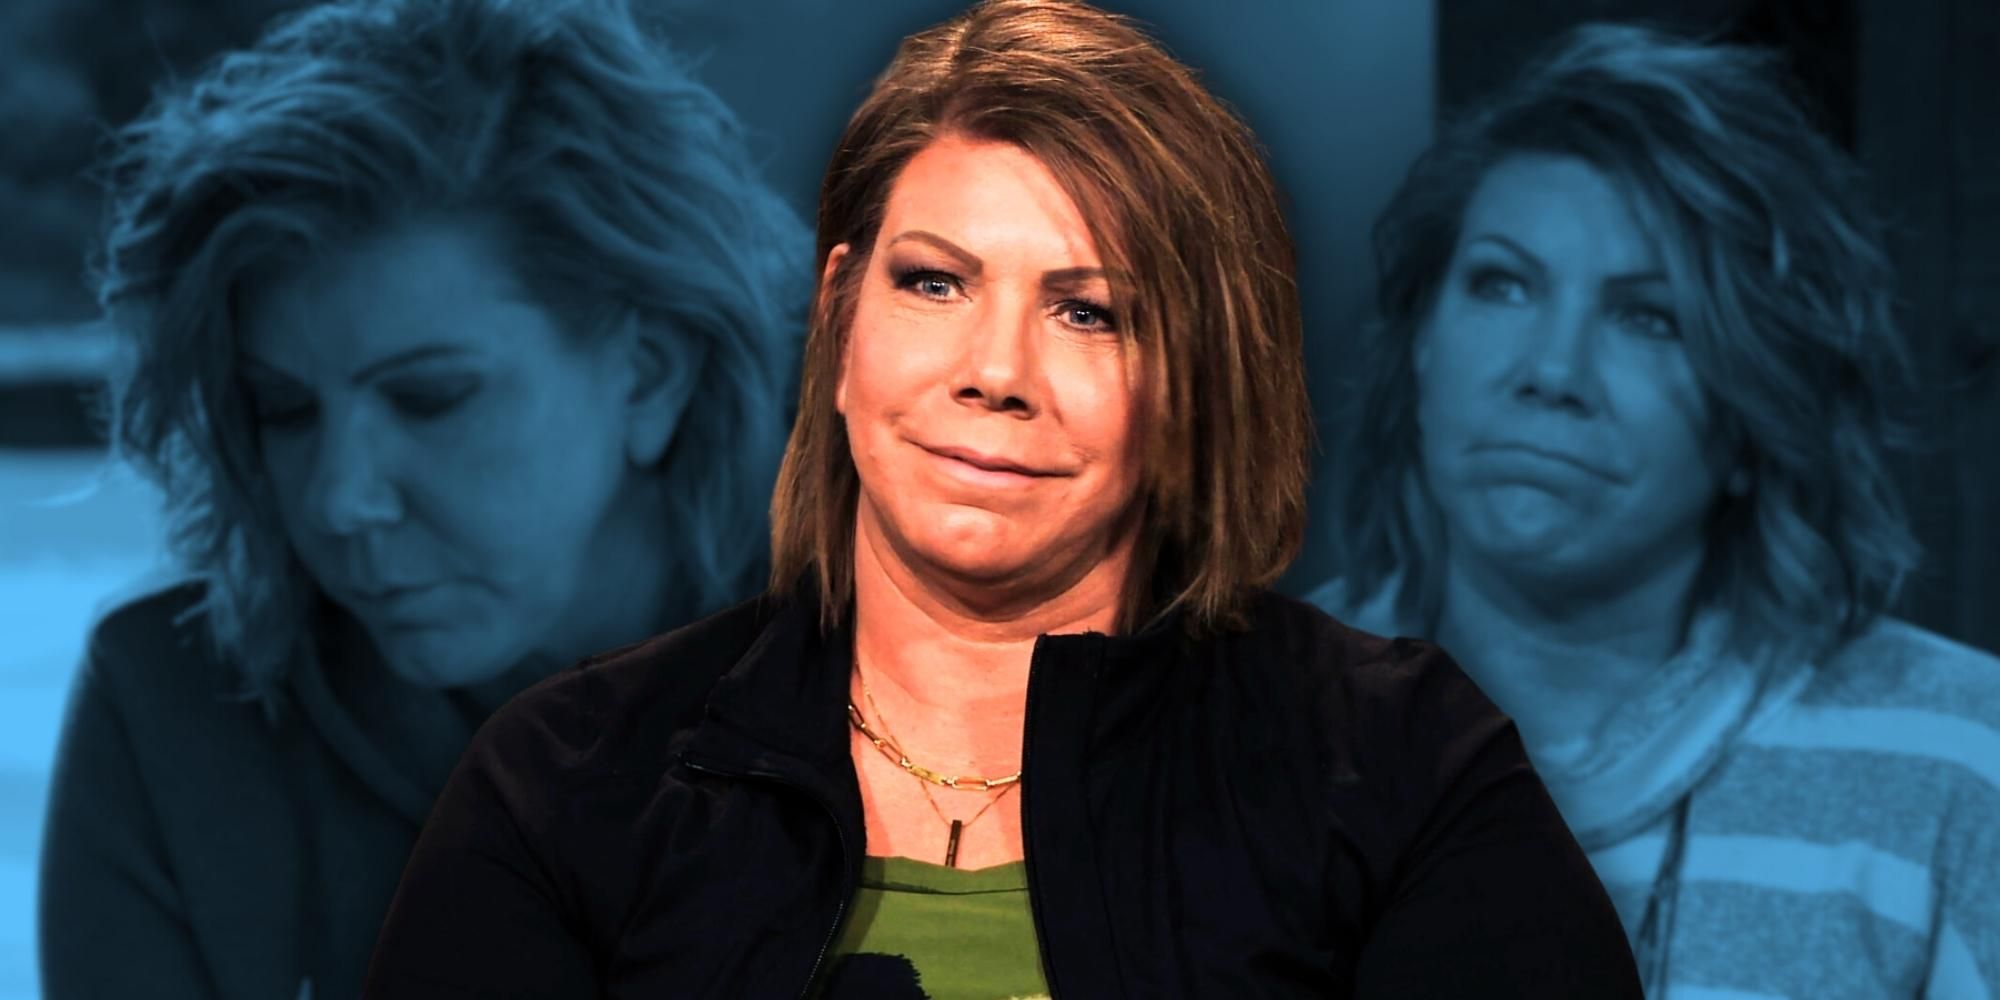 Photo montage of Sister Wives Meri Brown's gentle smile on background with blue filter